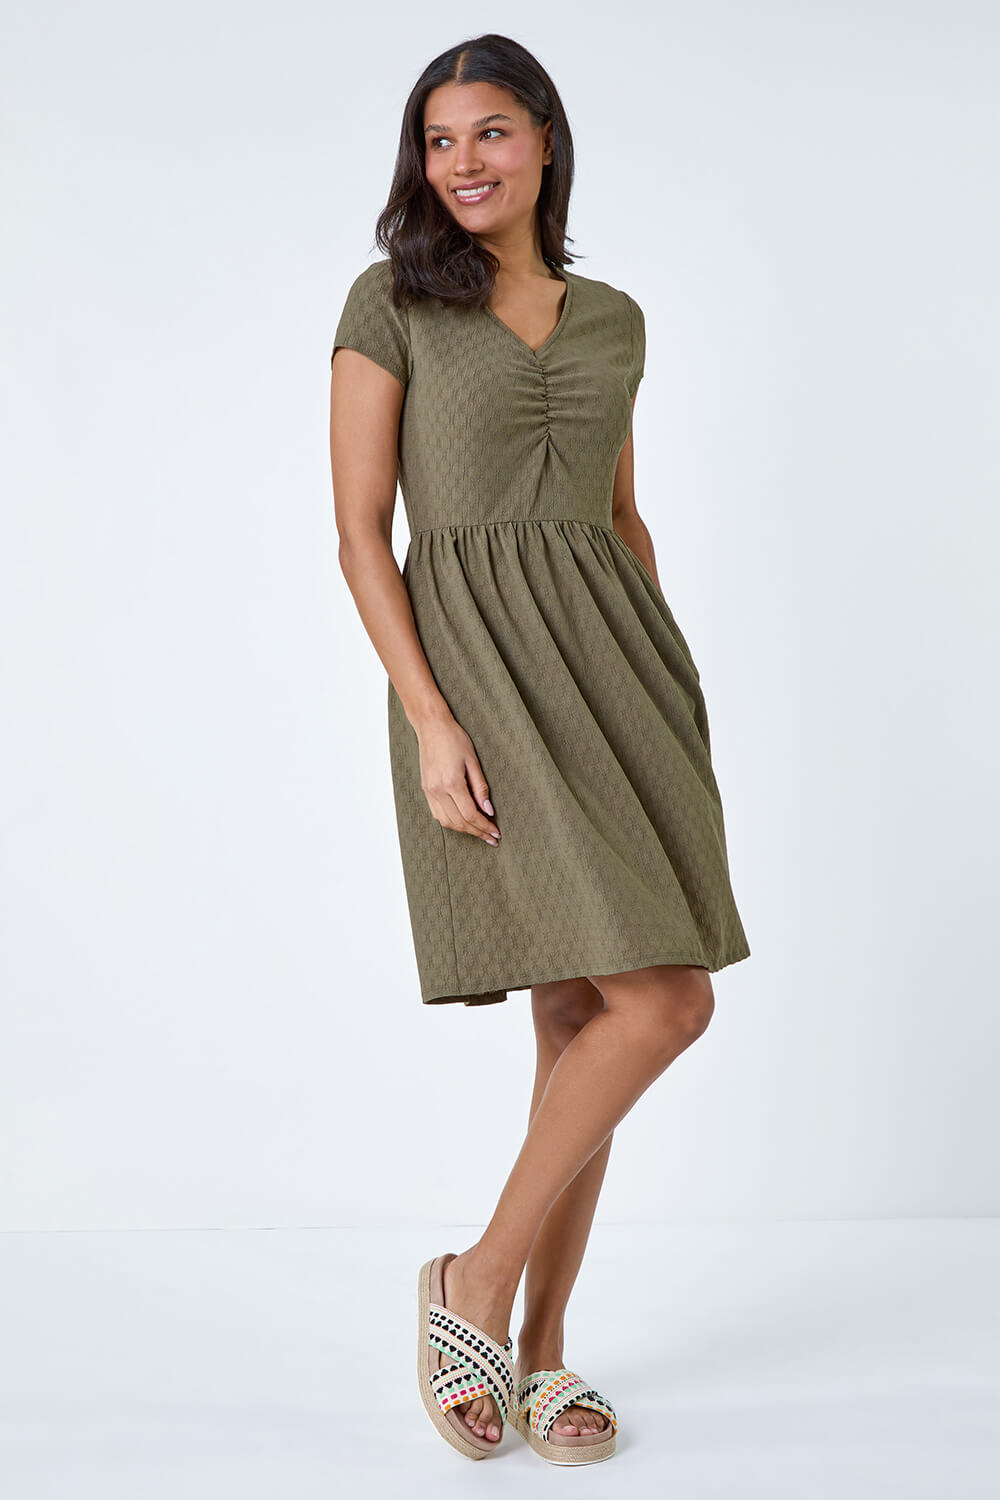 KHAKI Textured Ruched Stretch Jersey Dress, Image 2 of 5